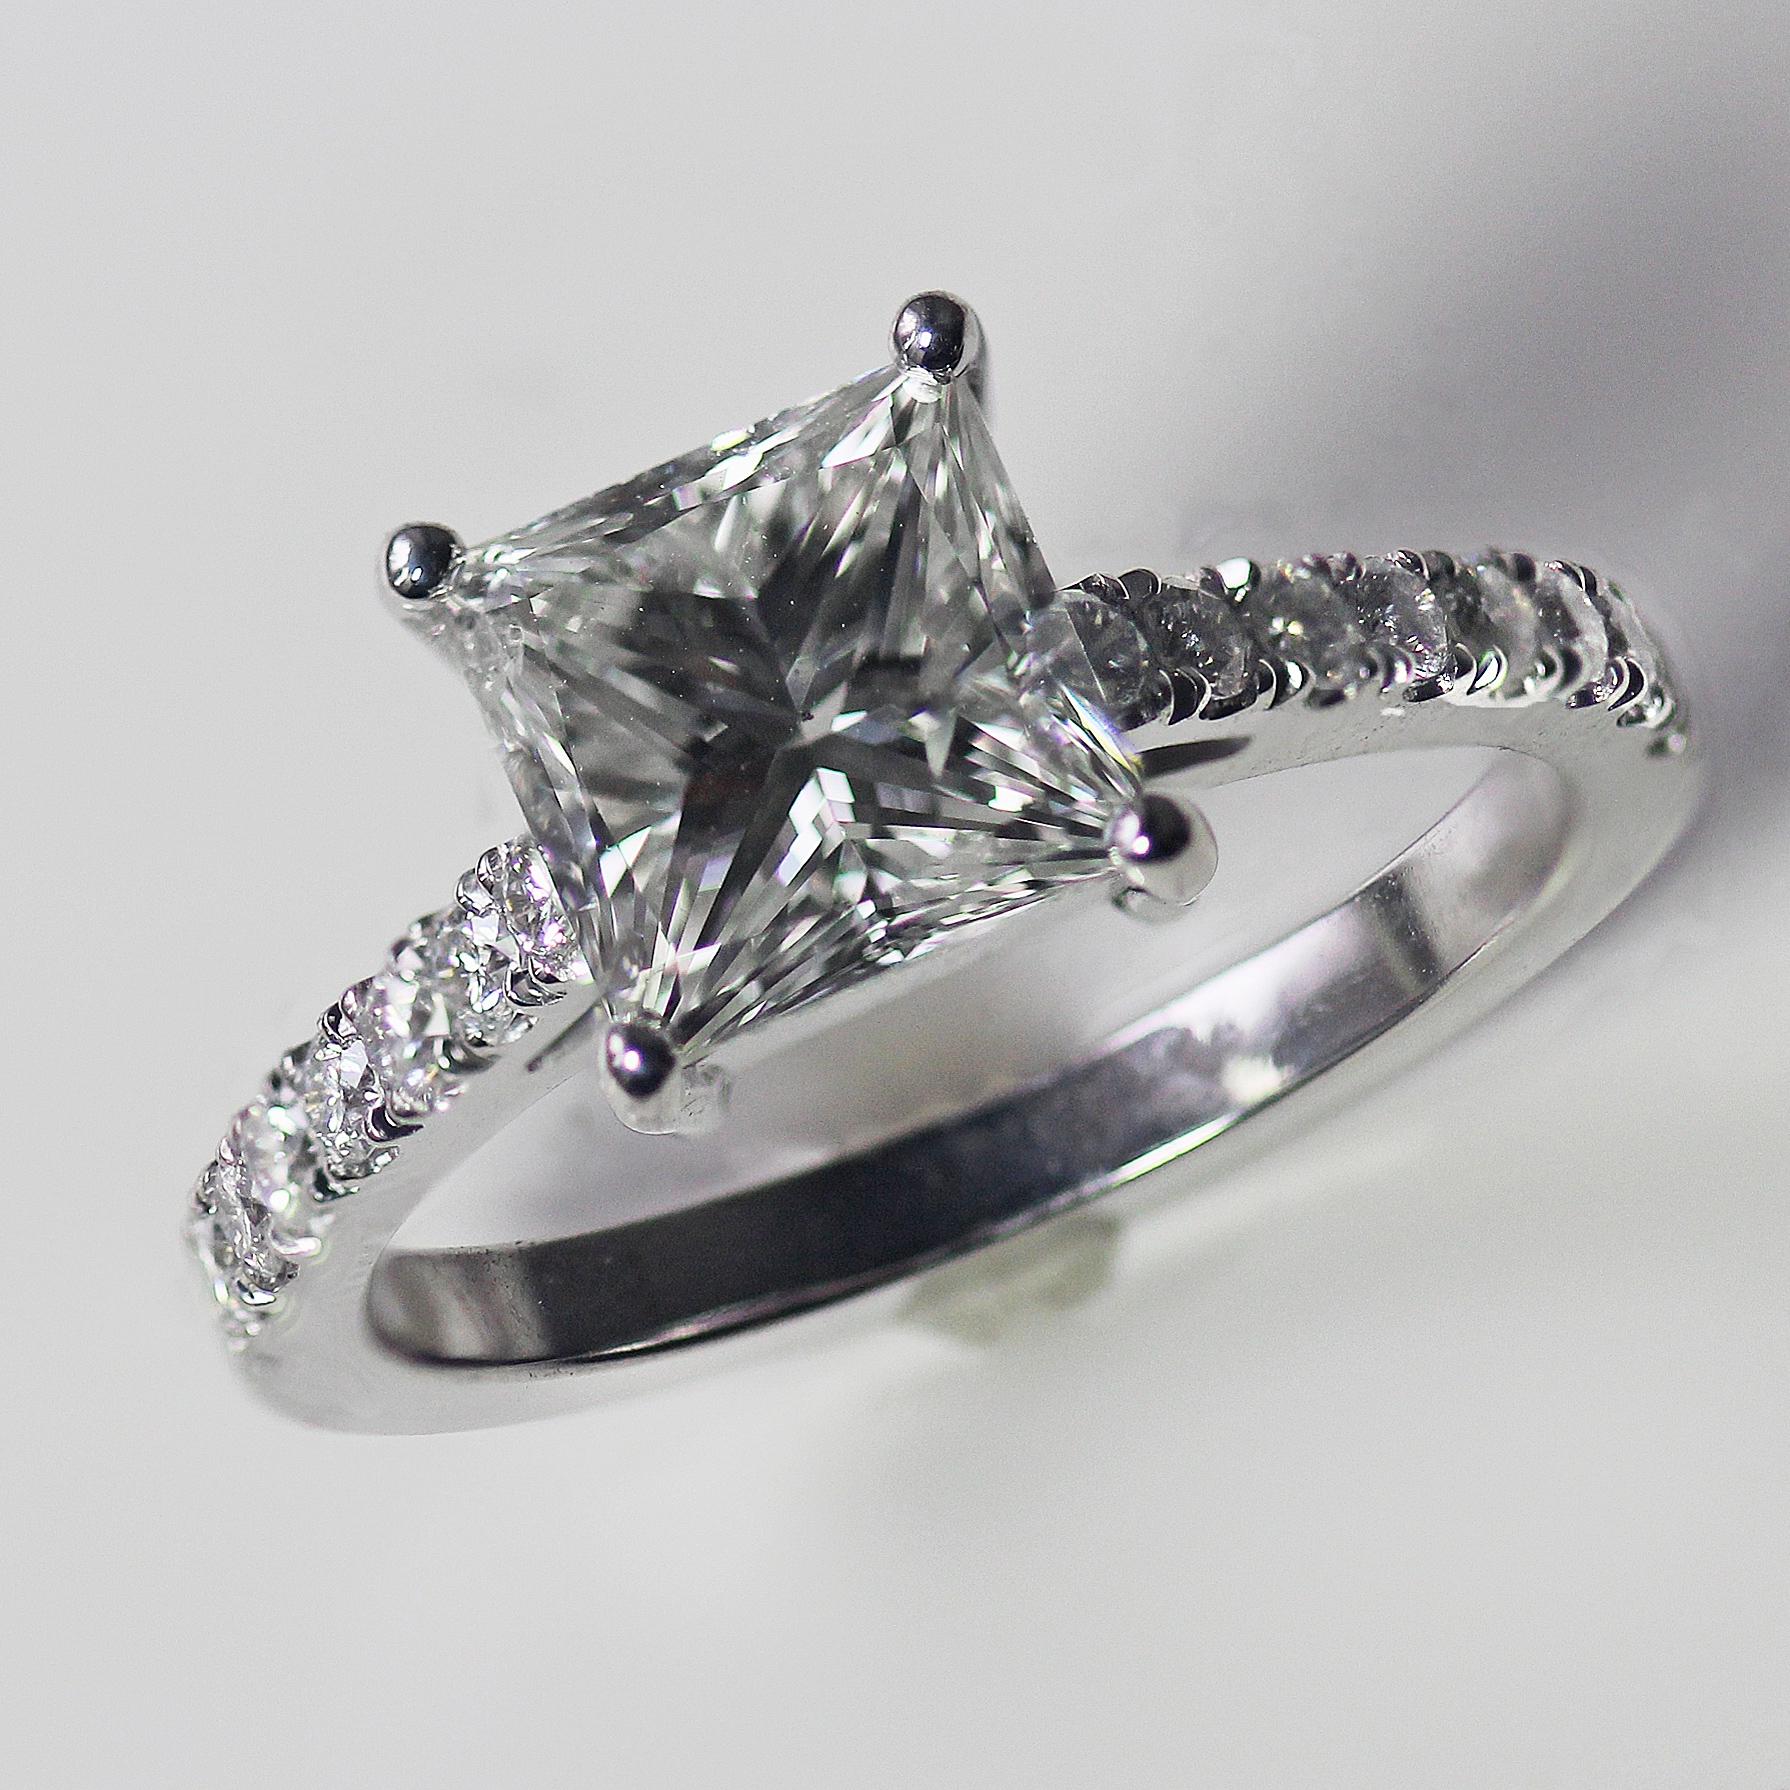 Ring May be made to order from scratch to accommodate your exact finger size 

or a different stone if the budget requires it, takes approximately 7-10 business days

Setting with no center stone can be purchased also.

Also Shown in the pictures is